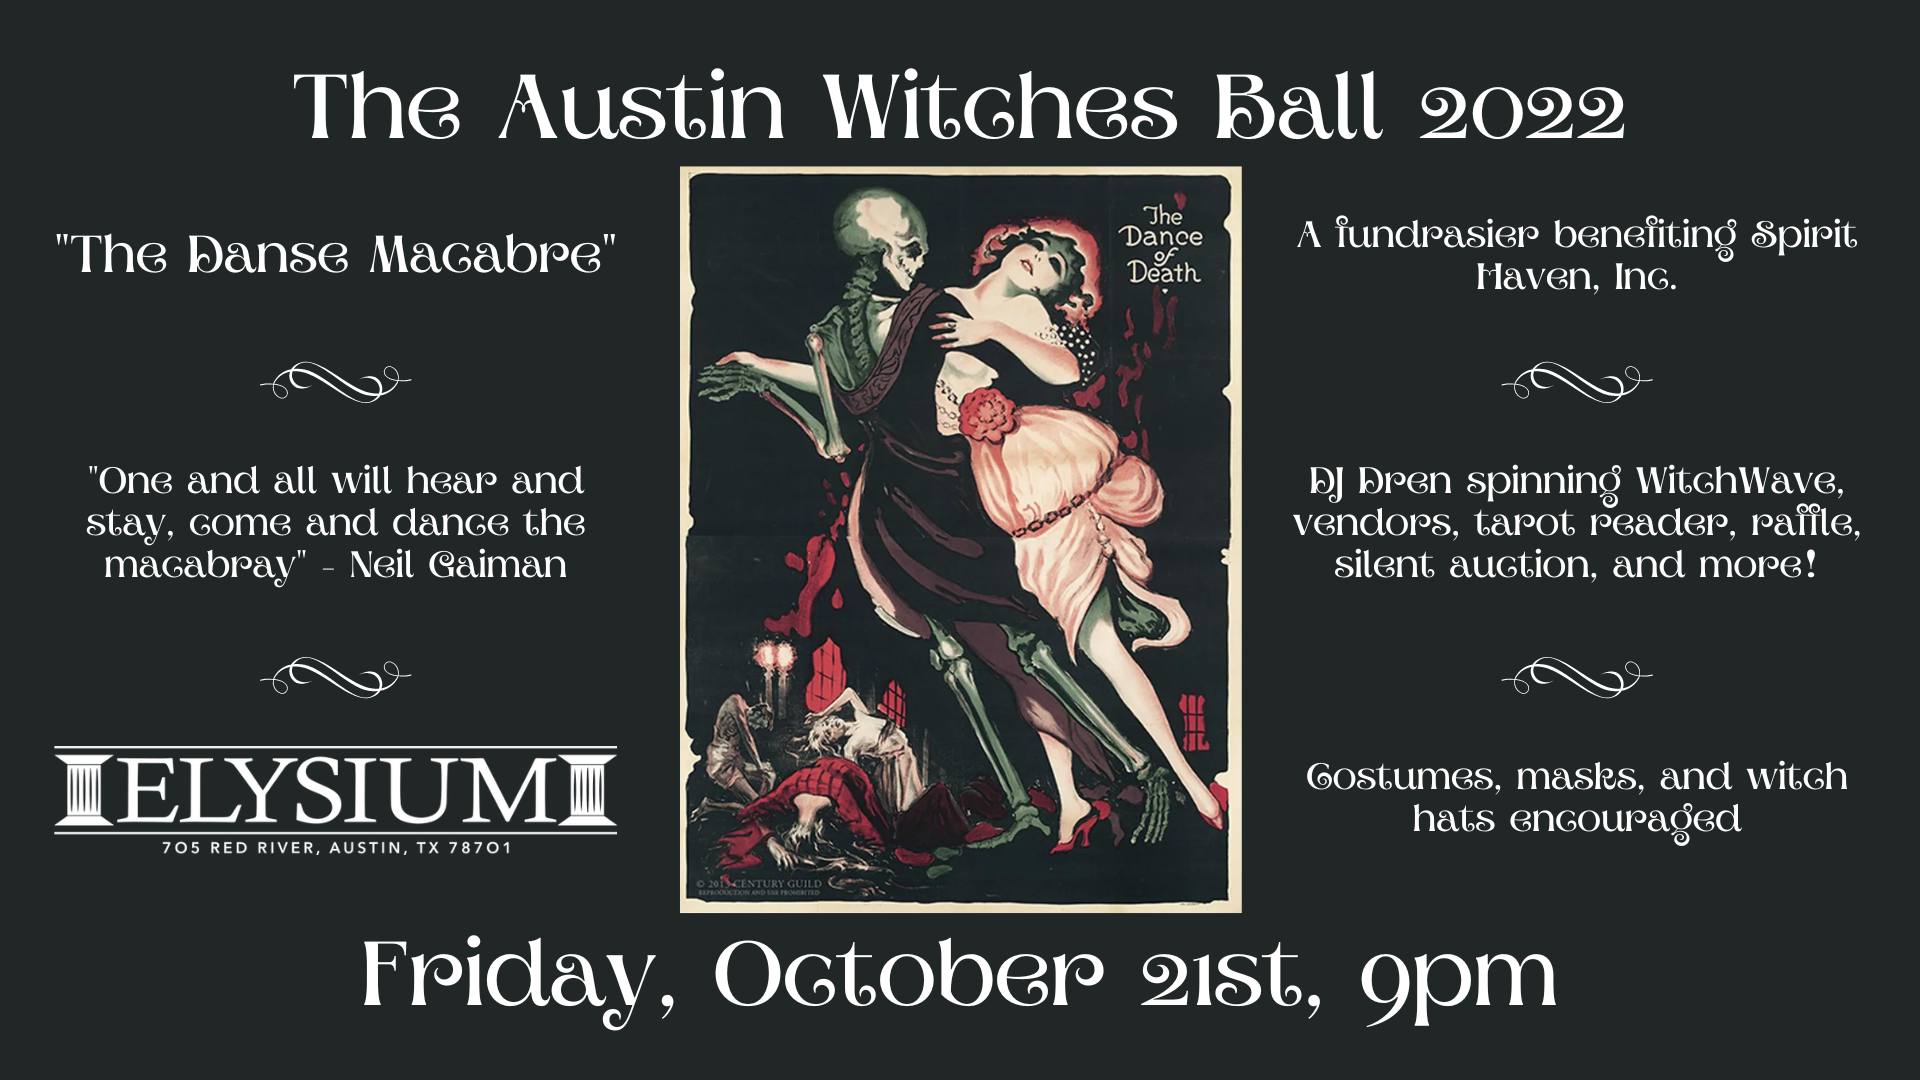 The Austin Witches Ball 2022